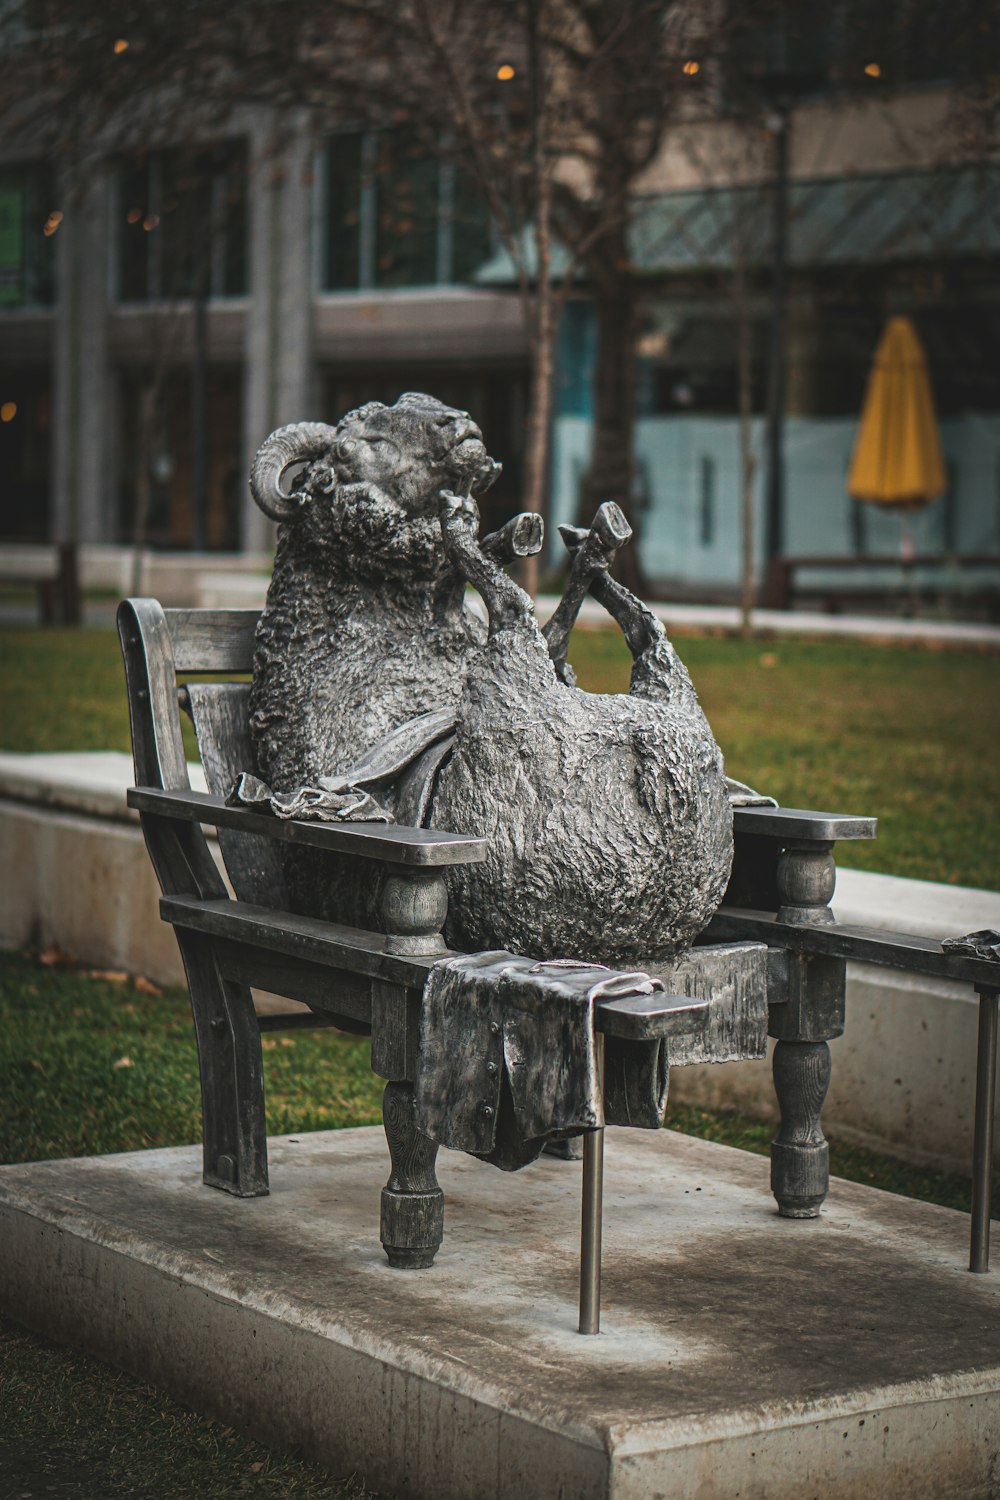 a statue of a bear sitting on a bench